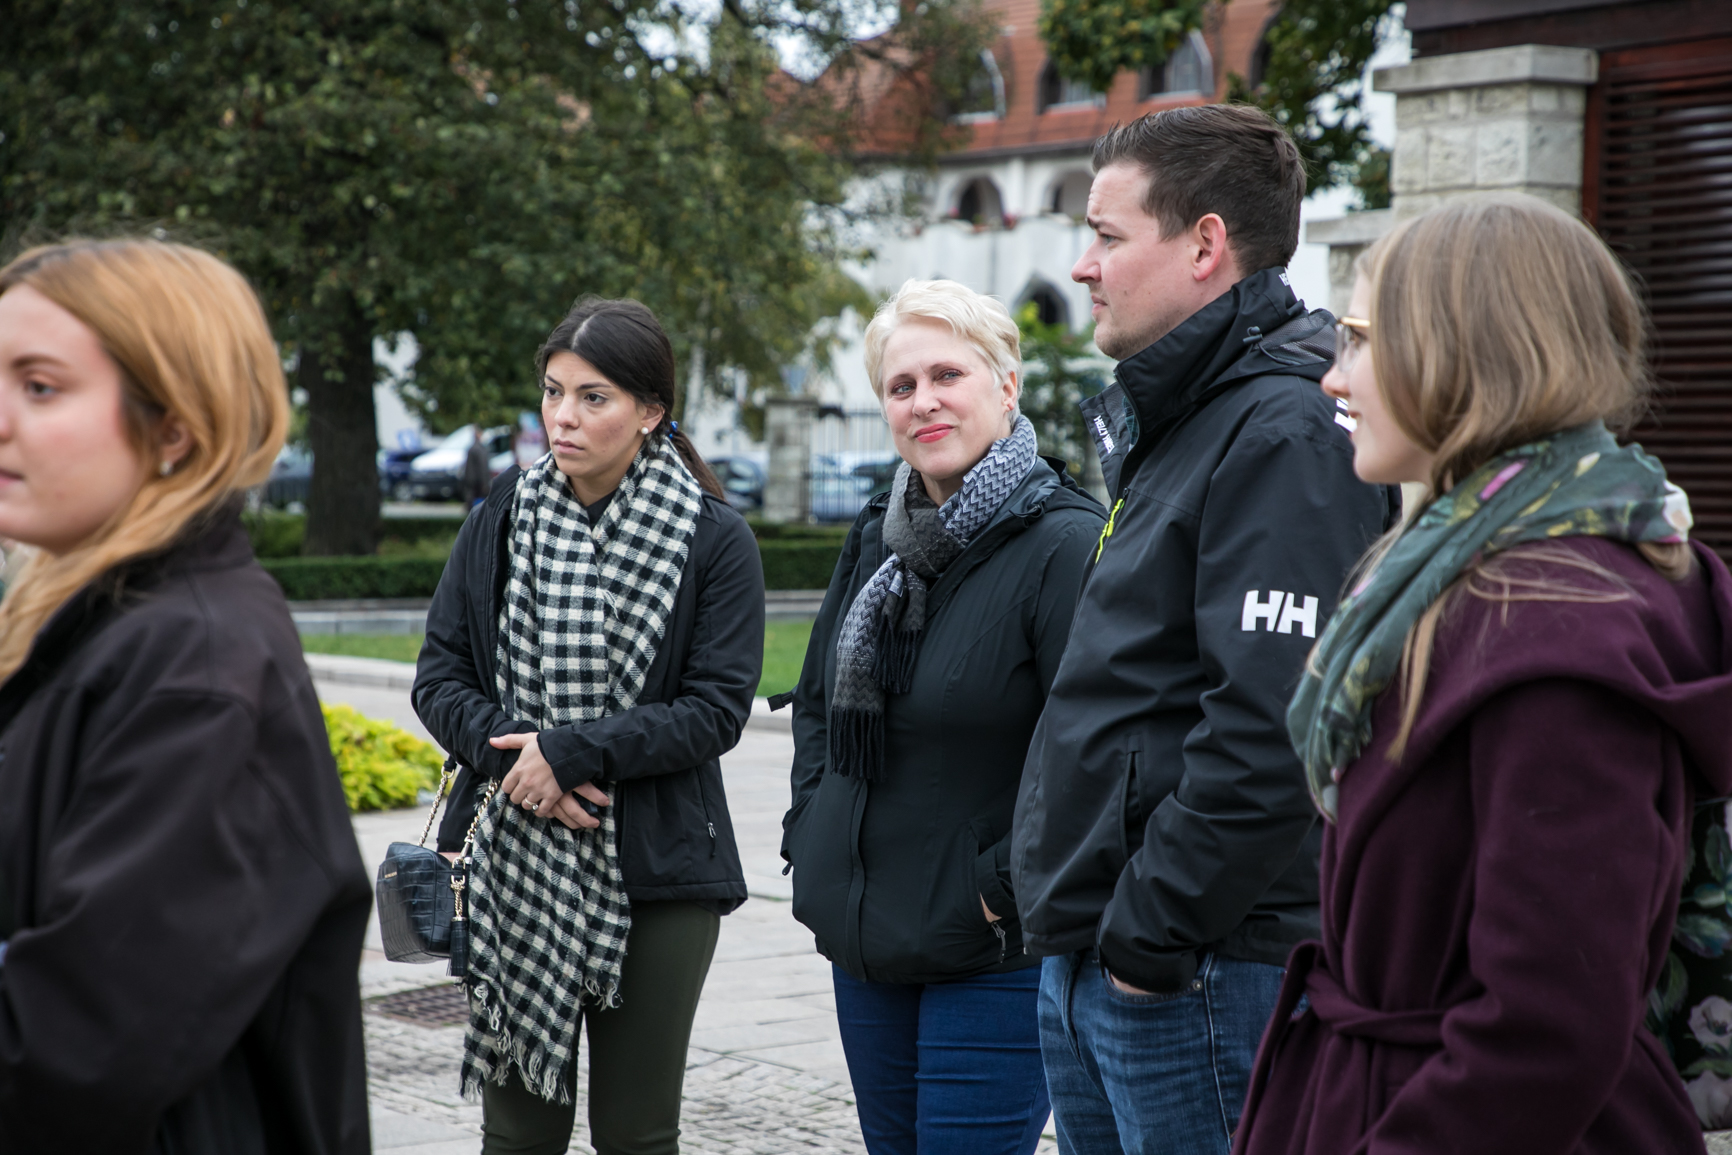 Kelli Buzzard, Budapest Fellow, receiving a tour of Hungary's areas of cultural importance with her cohort.